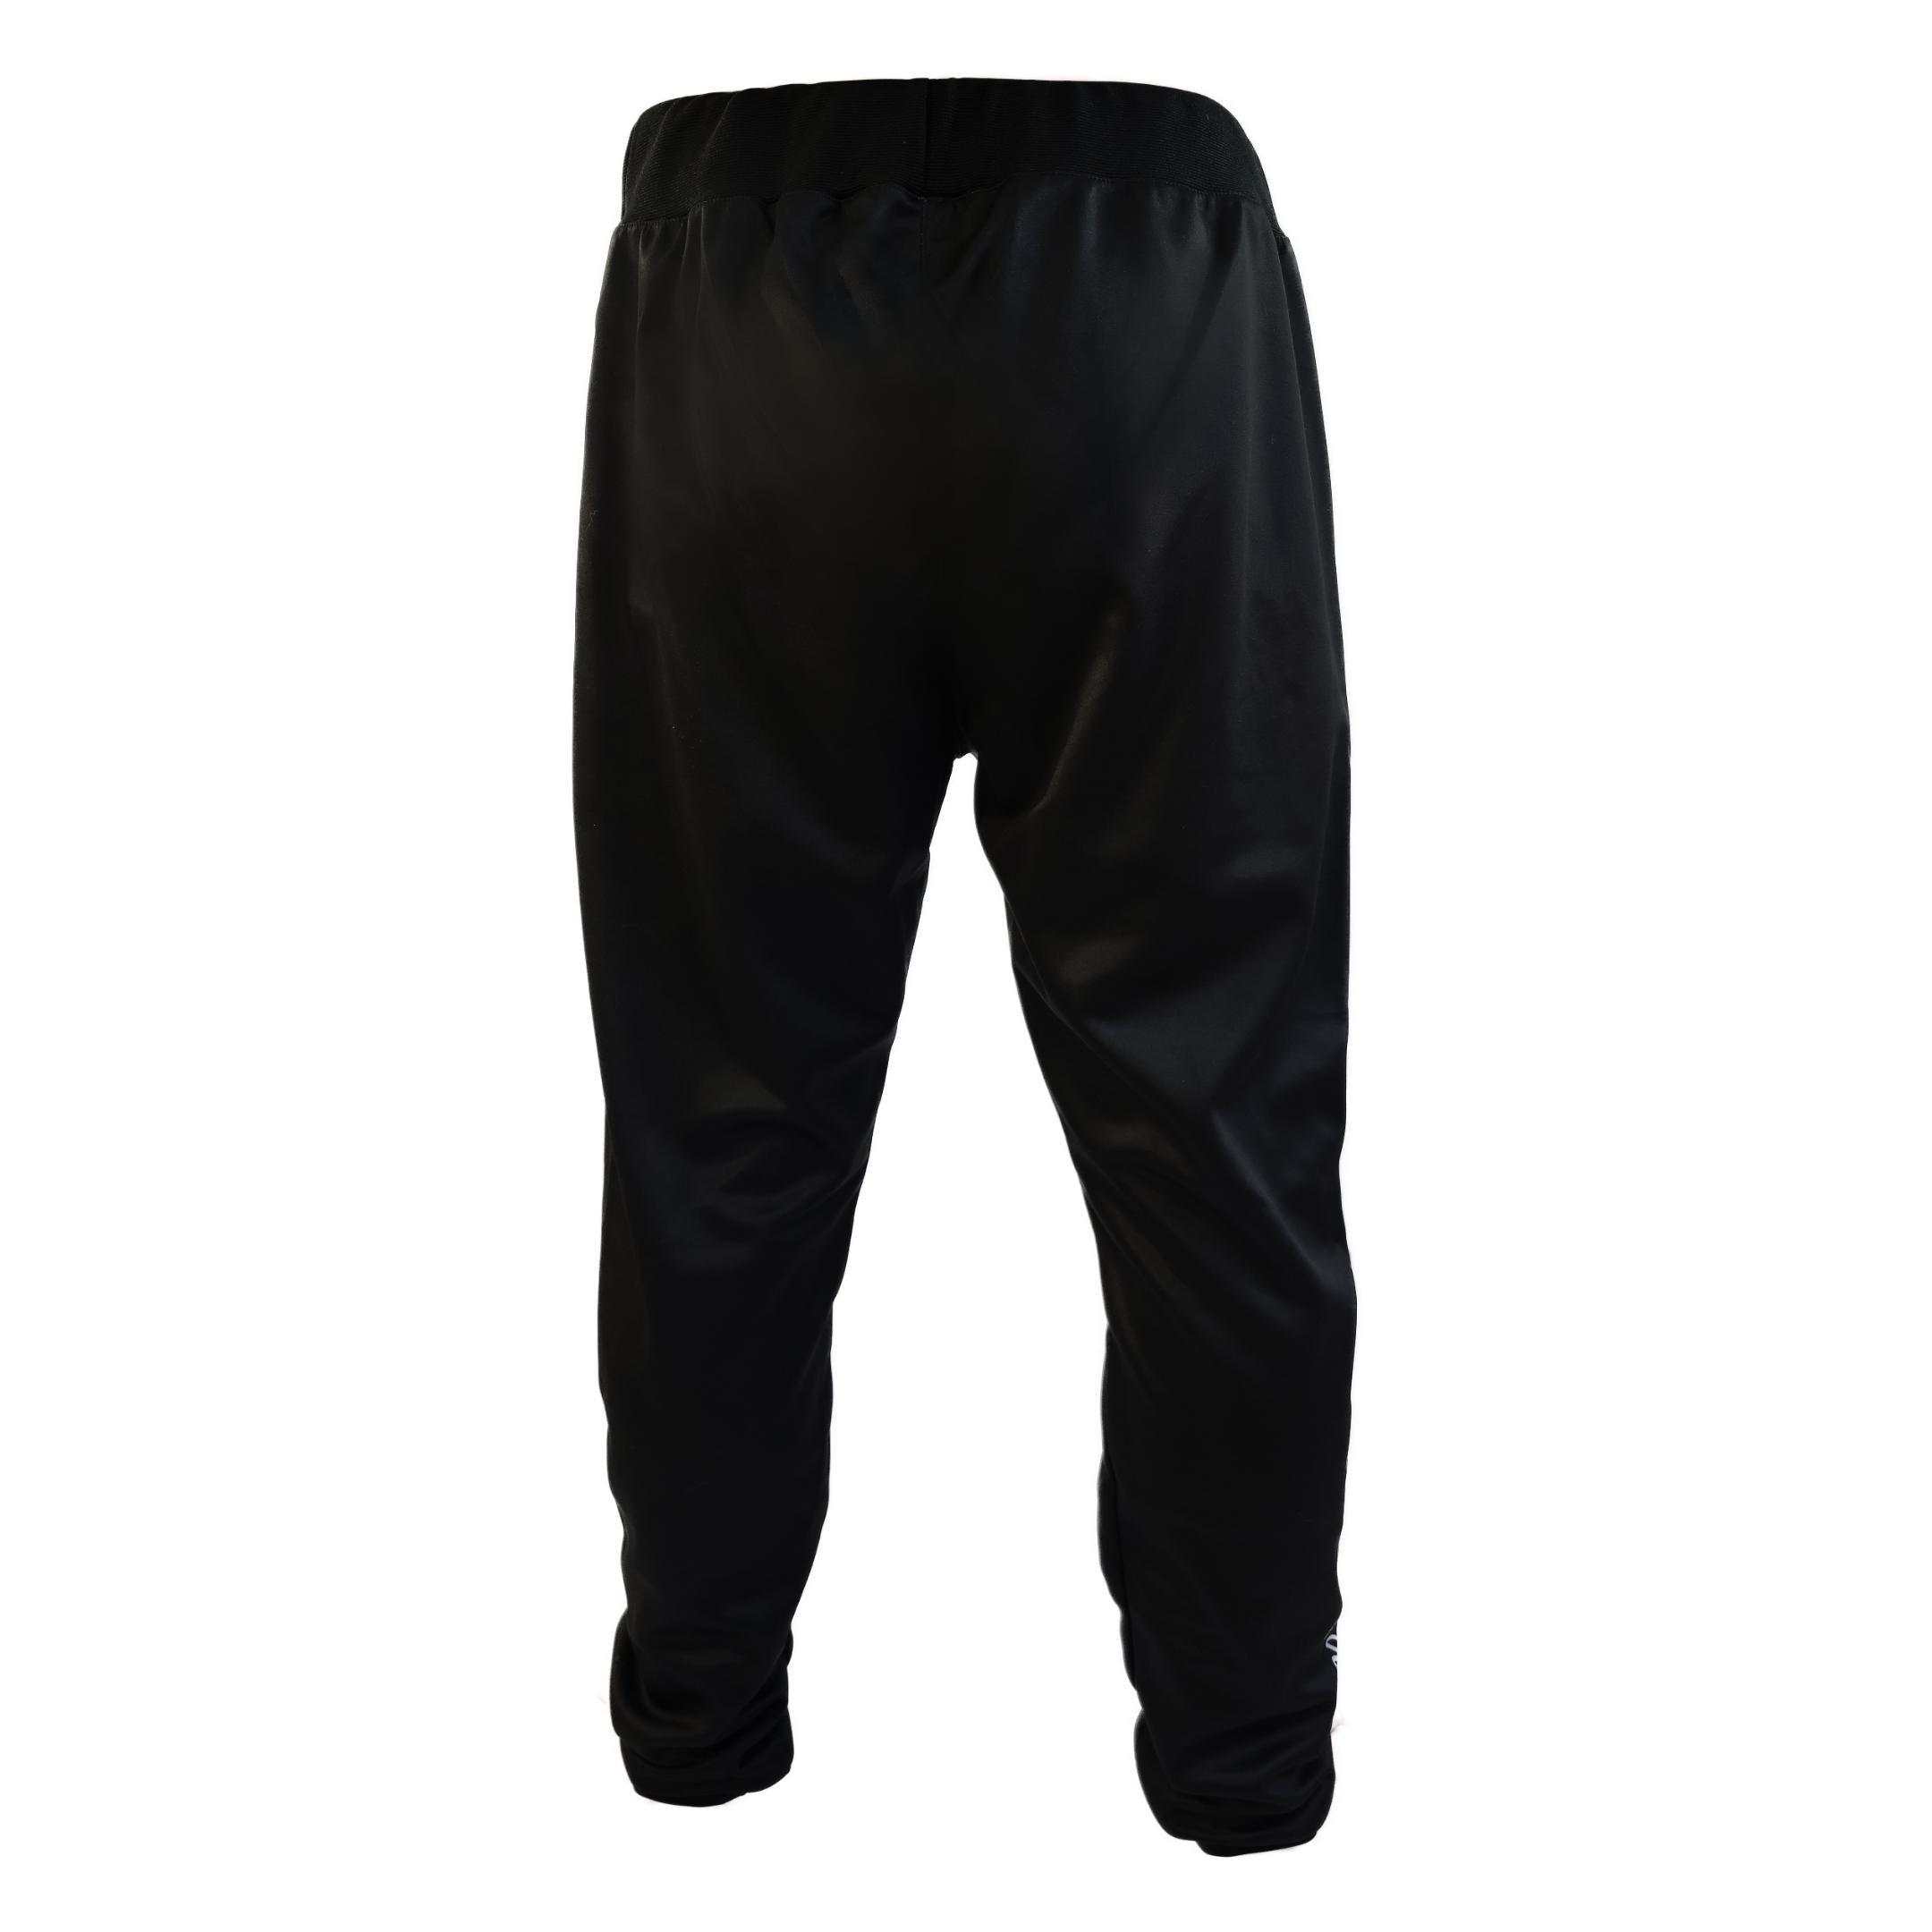 Cultivate Power Fighting Arts Joggers